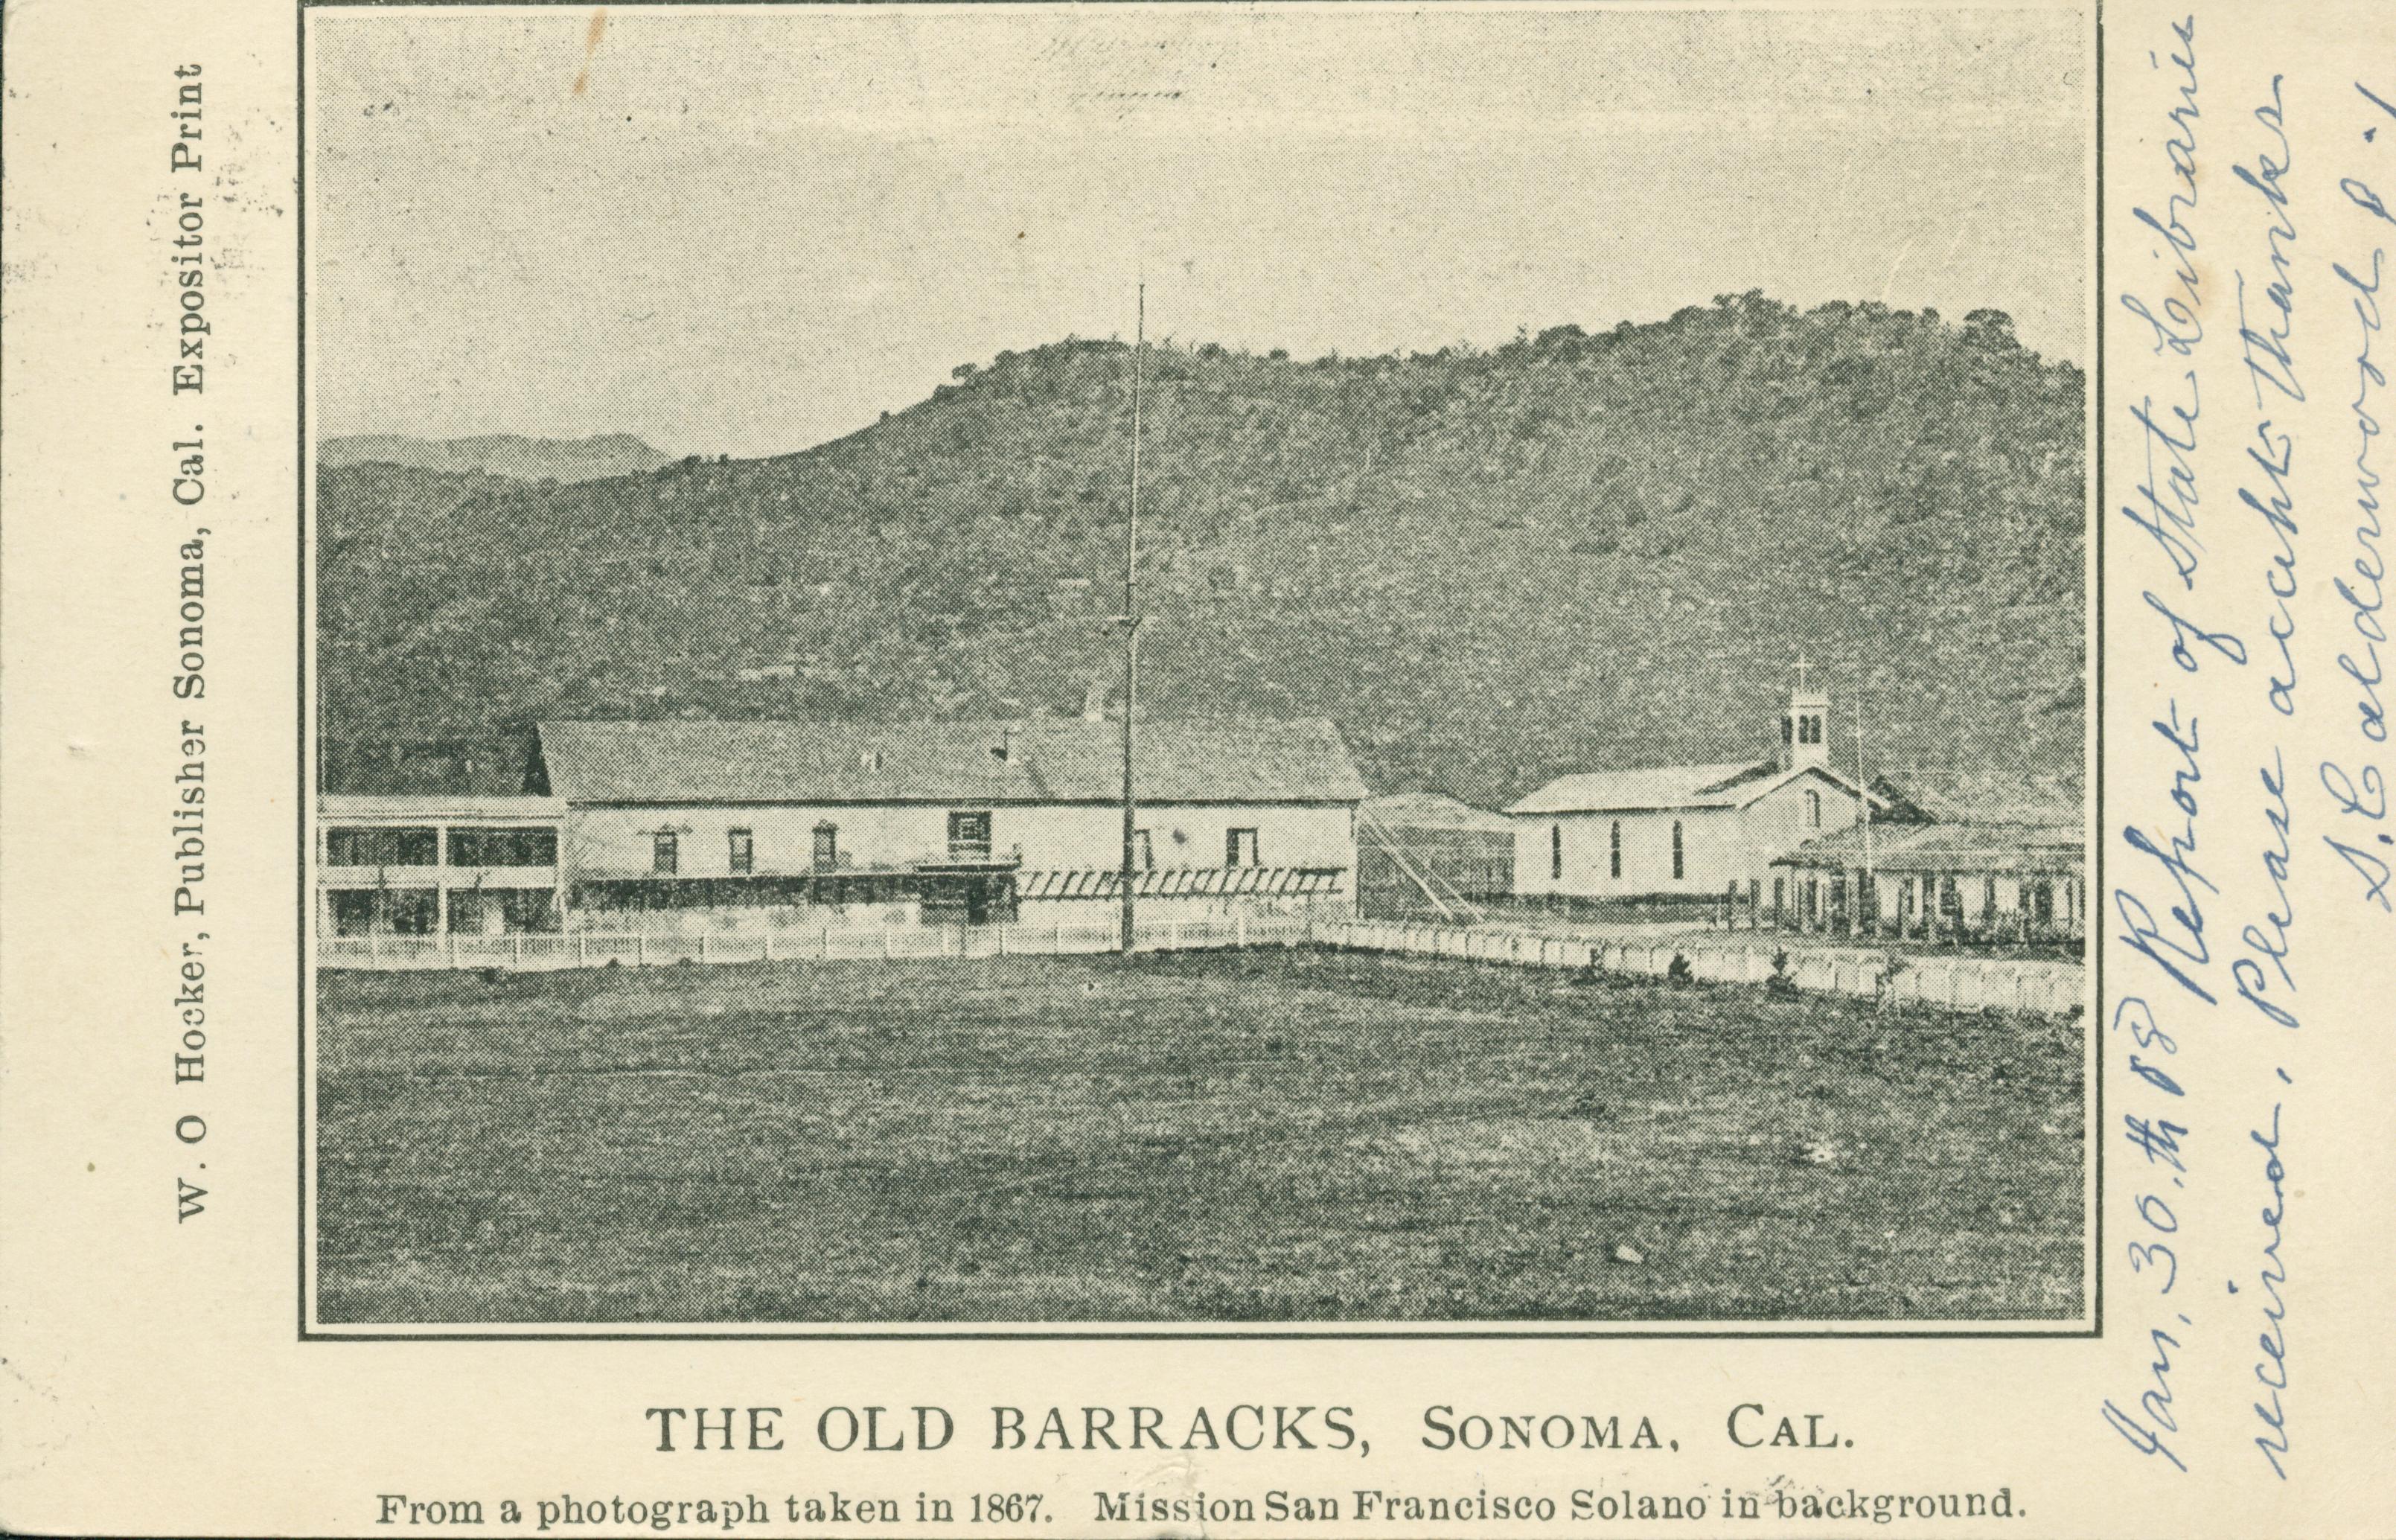 Shows the barracks overlooking a pasture with the mission in the background